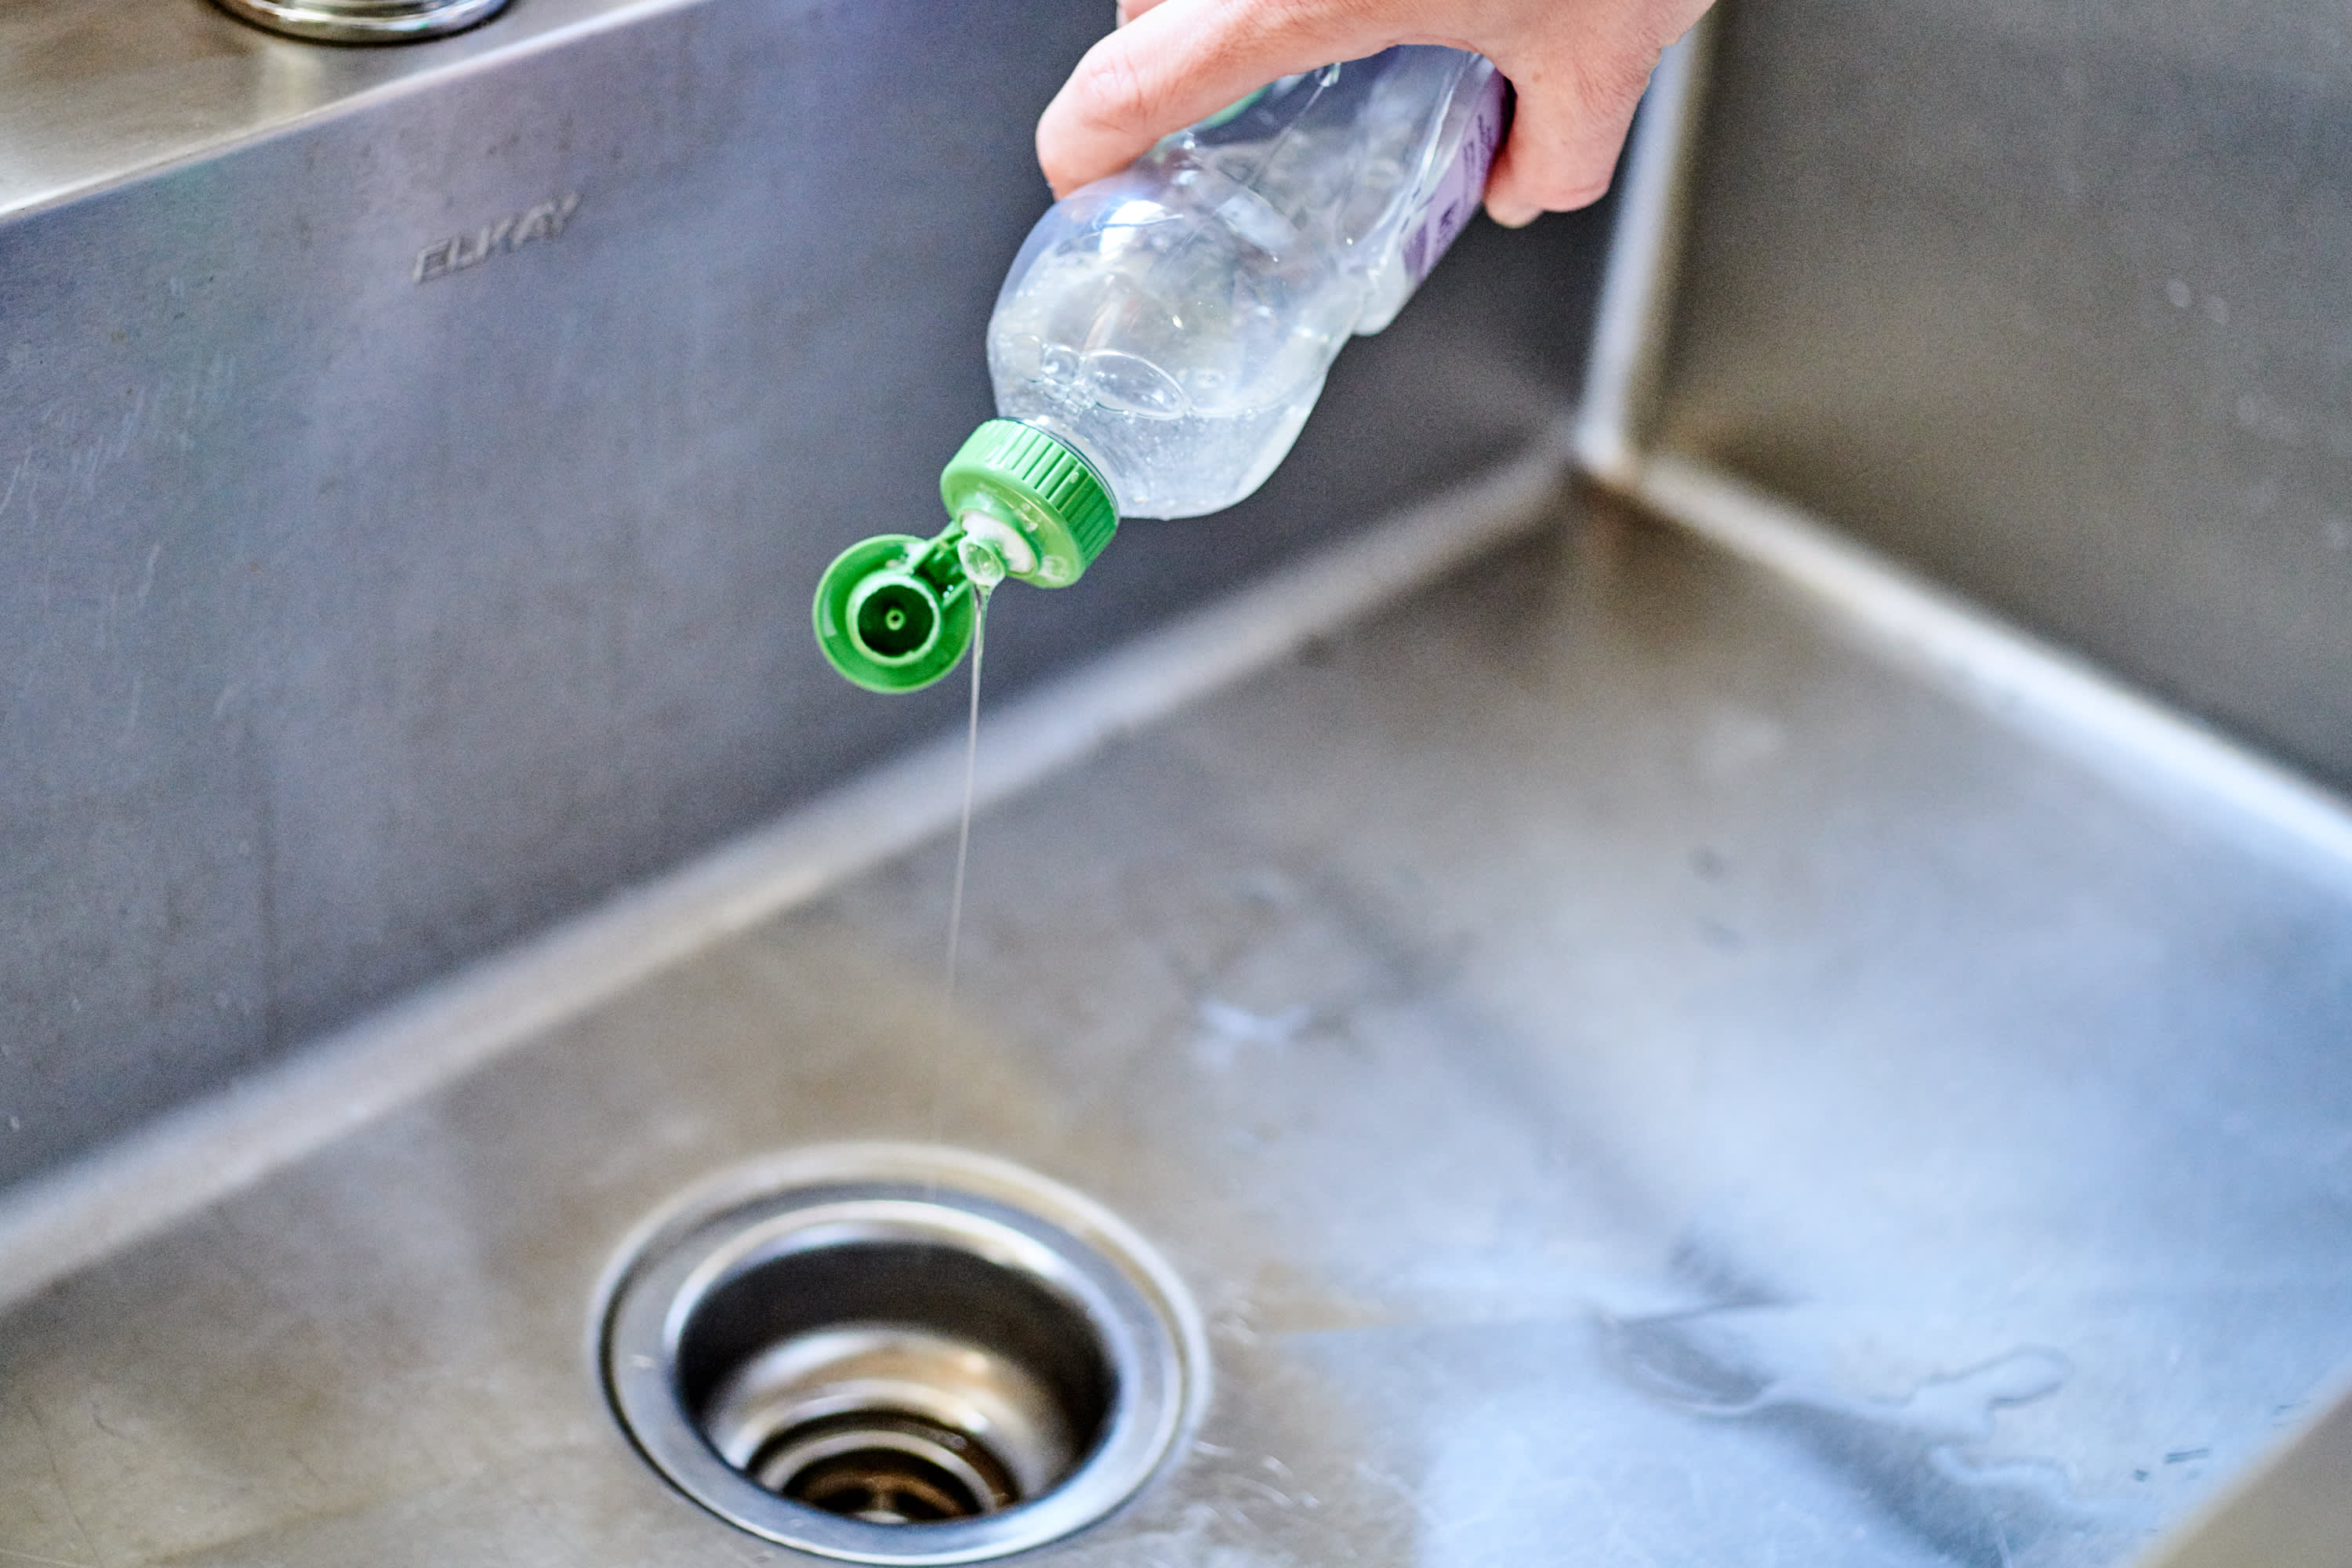 What Really Happens When You Pour a Chemical Drain Cleaner Down a Drain